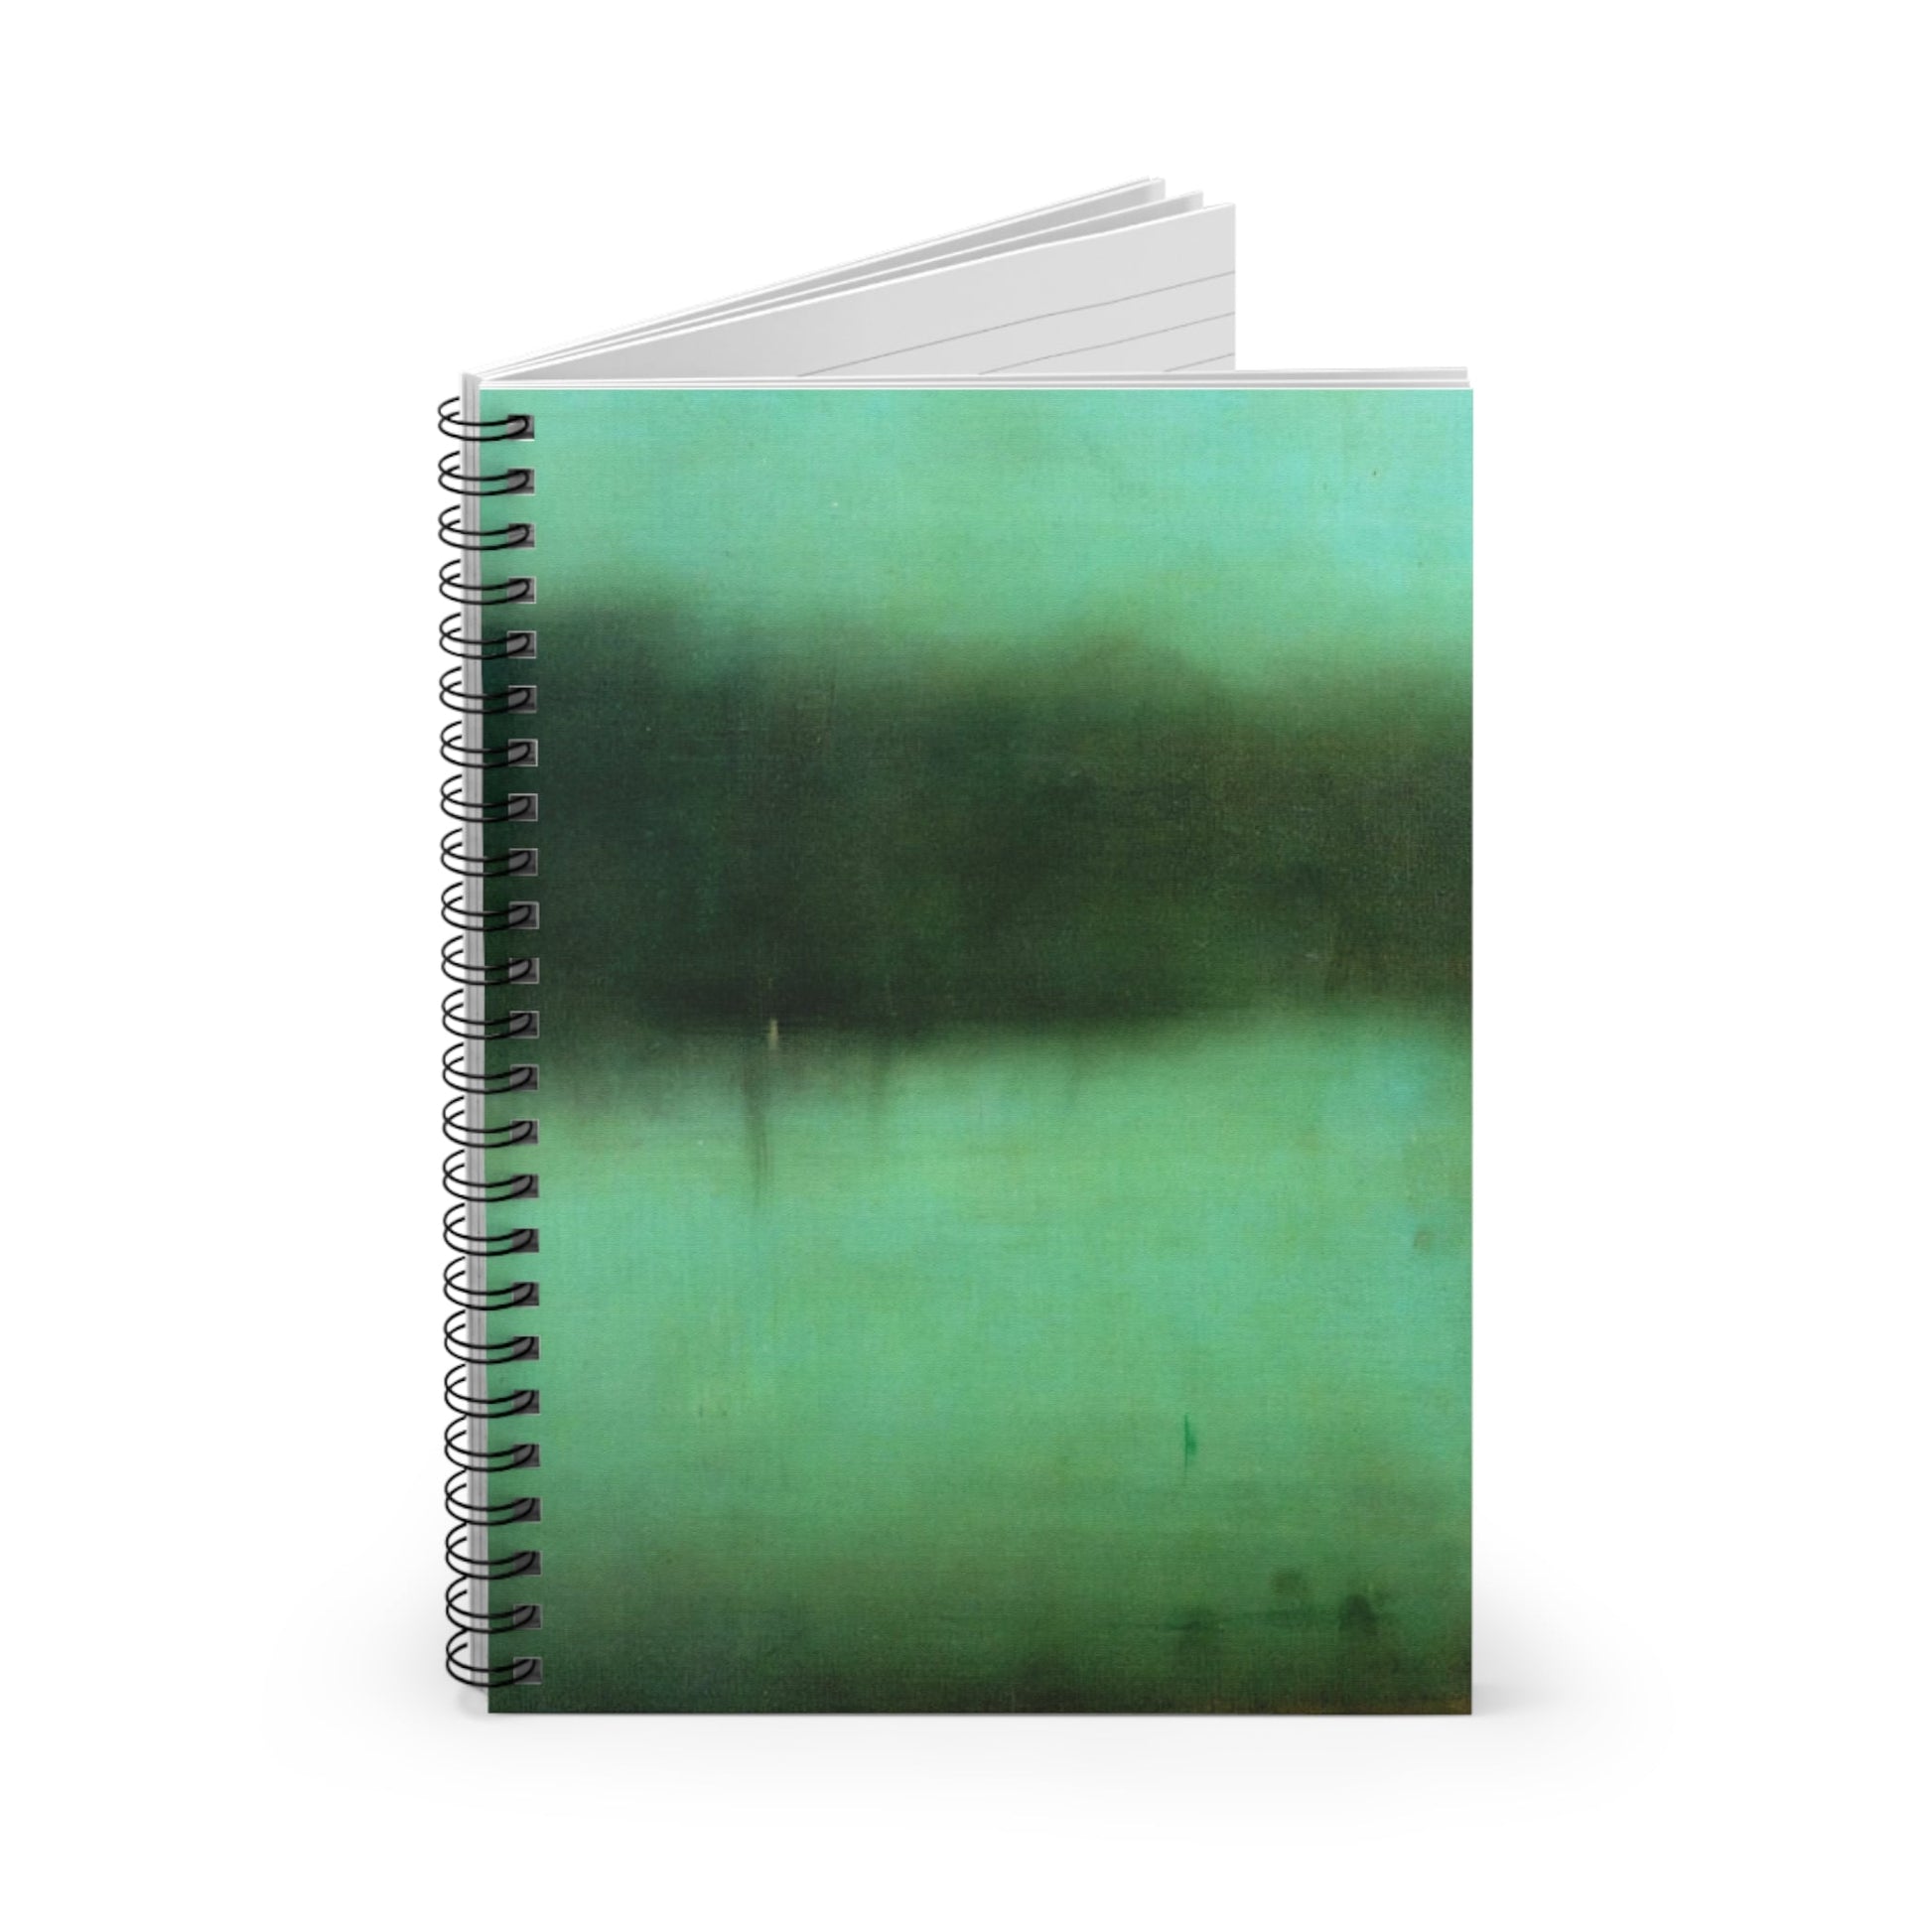 Black and Green Spiral Notebook Standing up on White Desk